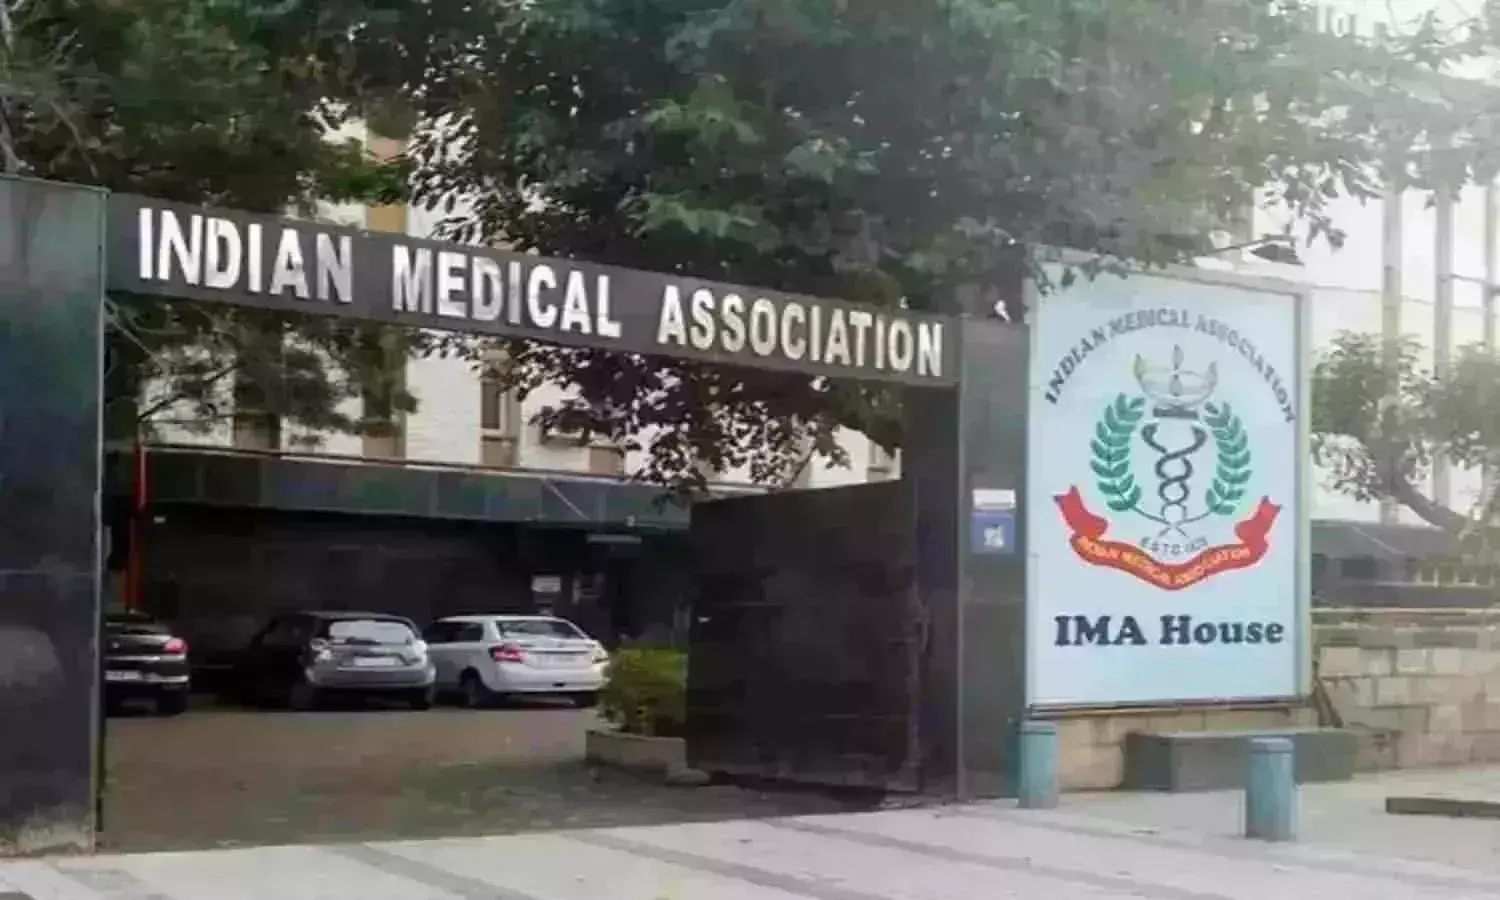 Ensure comprehensive steps to prevent fire incidents in hospitals: IMA